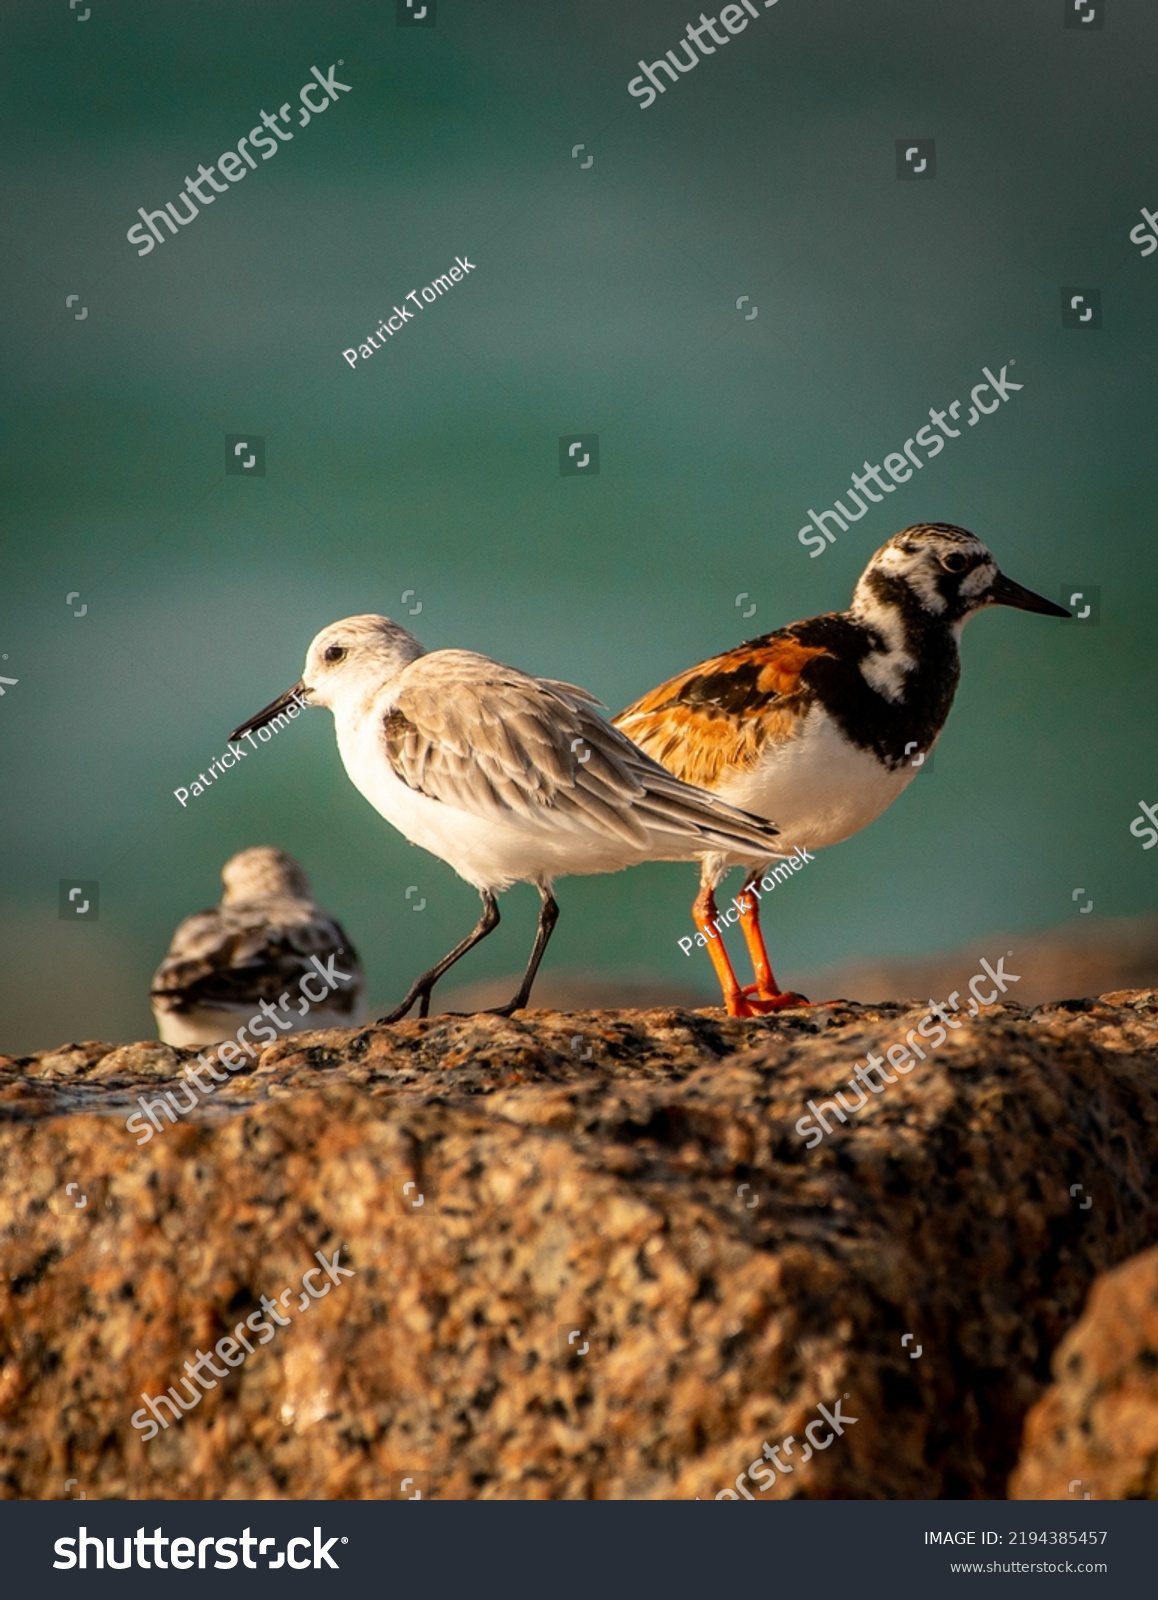 A sanderling along with a ruddy turnstone standing on top of a jetty on Matagorda beach. #2194385457